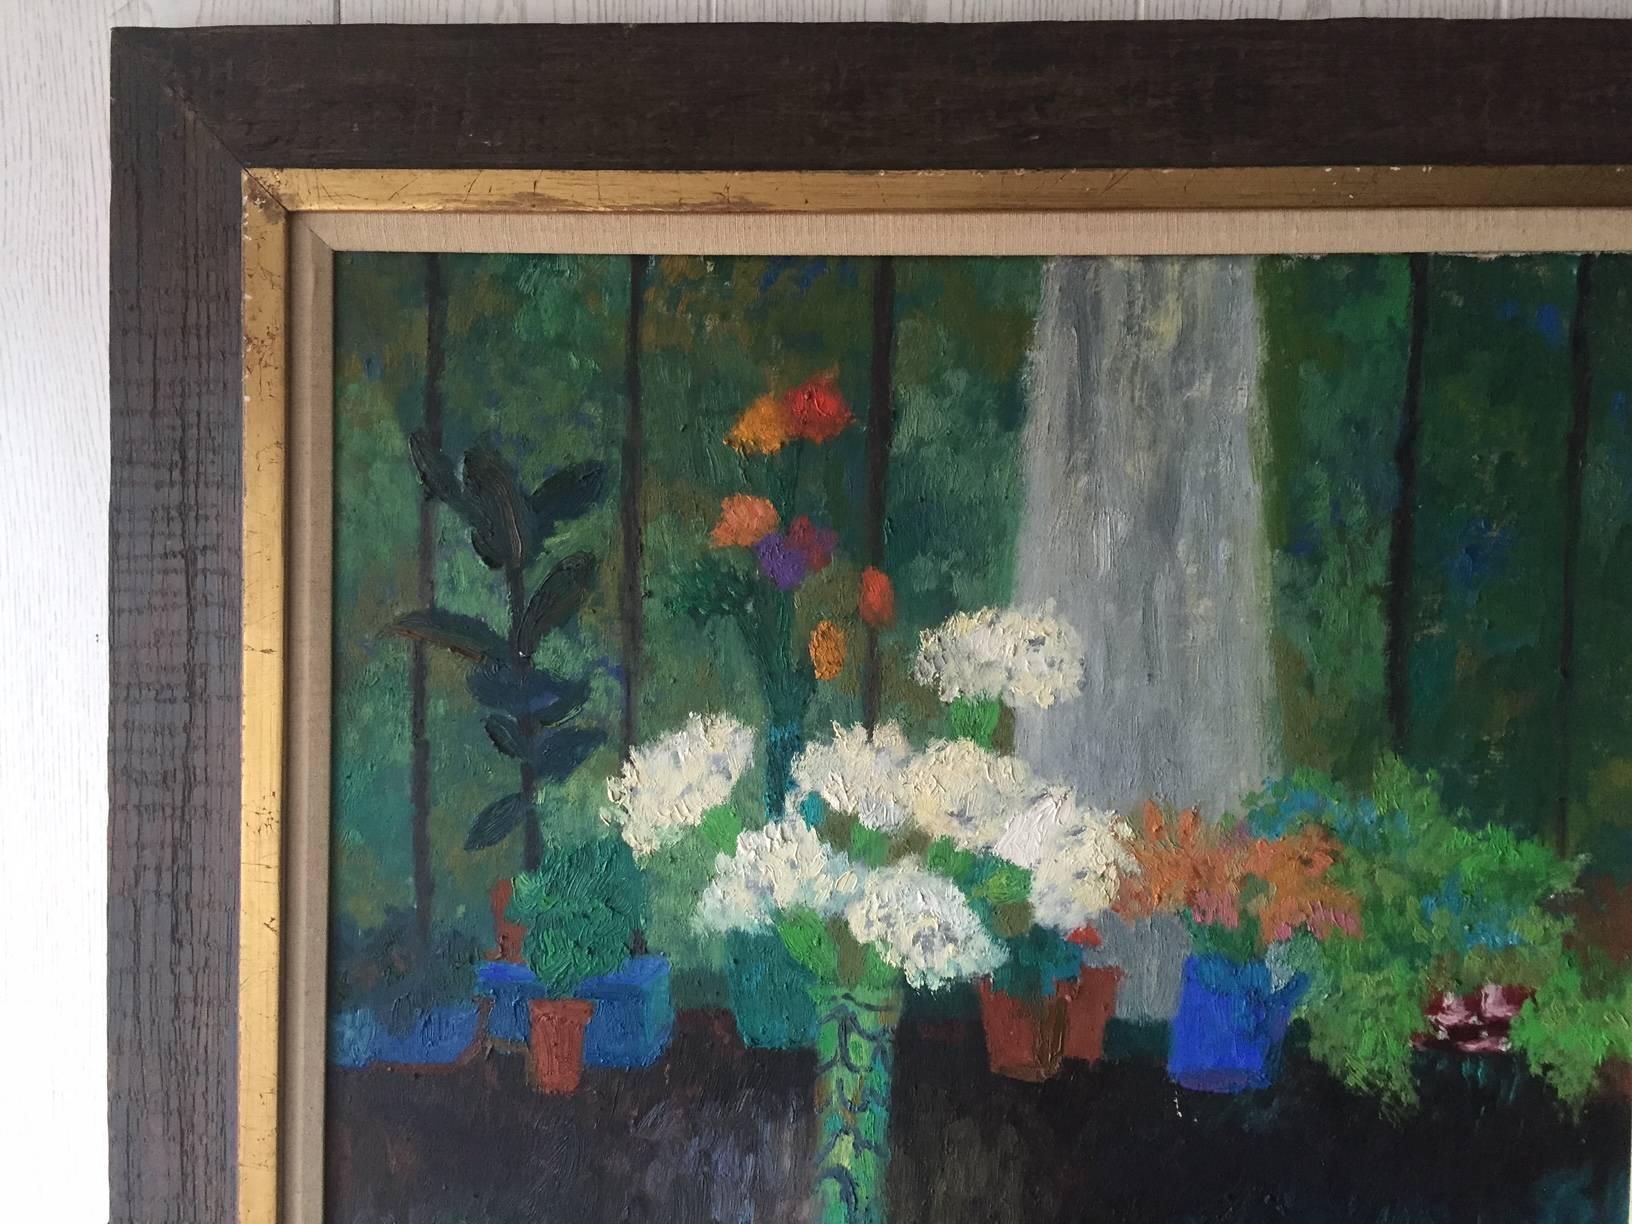 North American Still Life Oil on Canvas of Vase with Flowers 